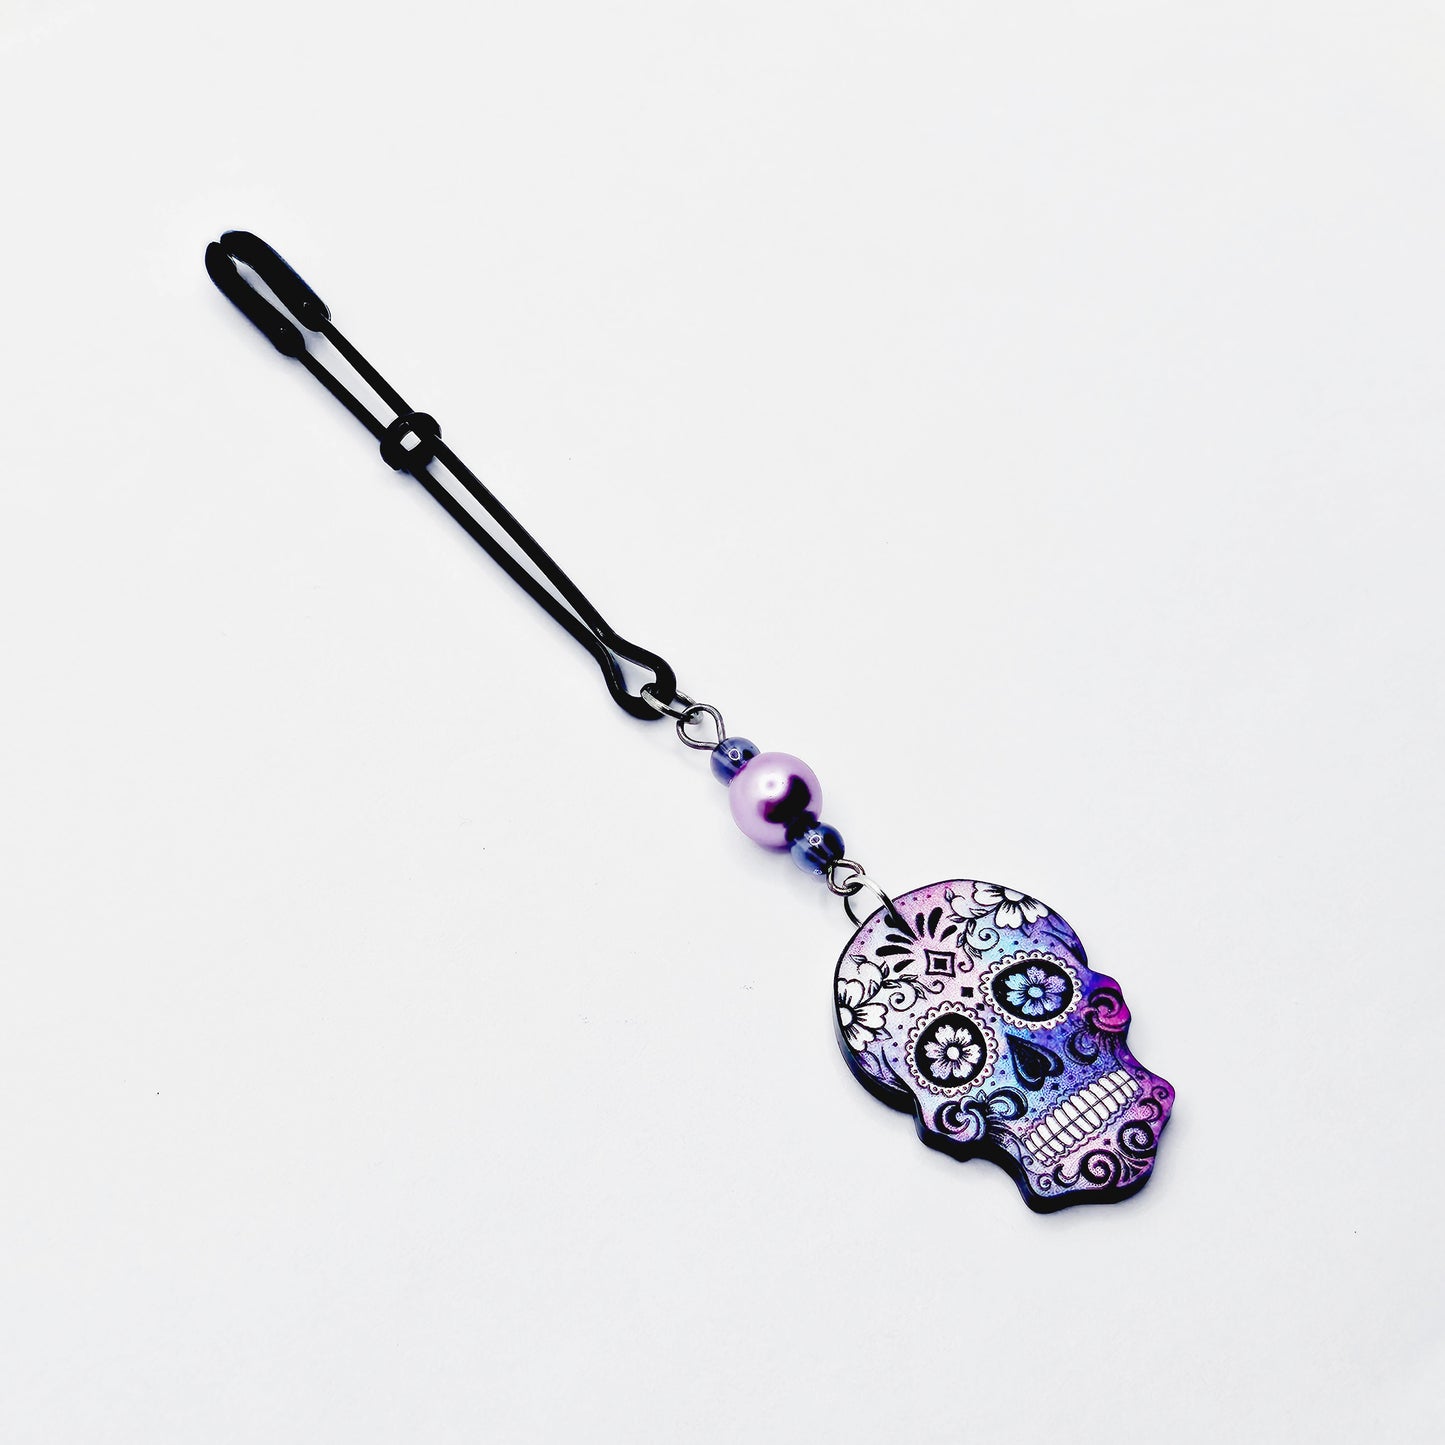 Clit Clamp with Sugar Skull. Tweezer Clitoral Clamp with Prety Beads and Skull.